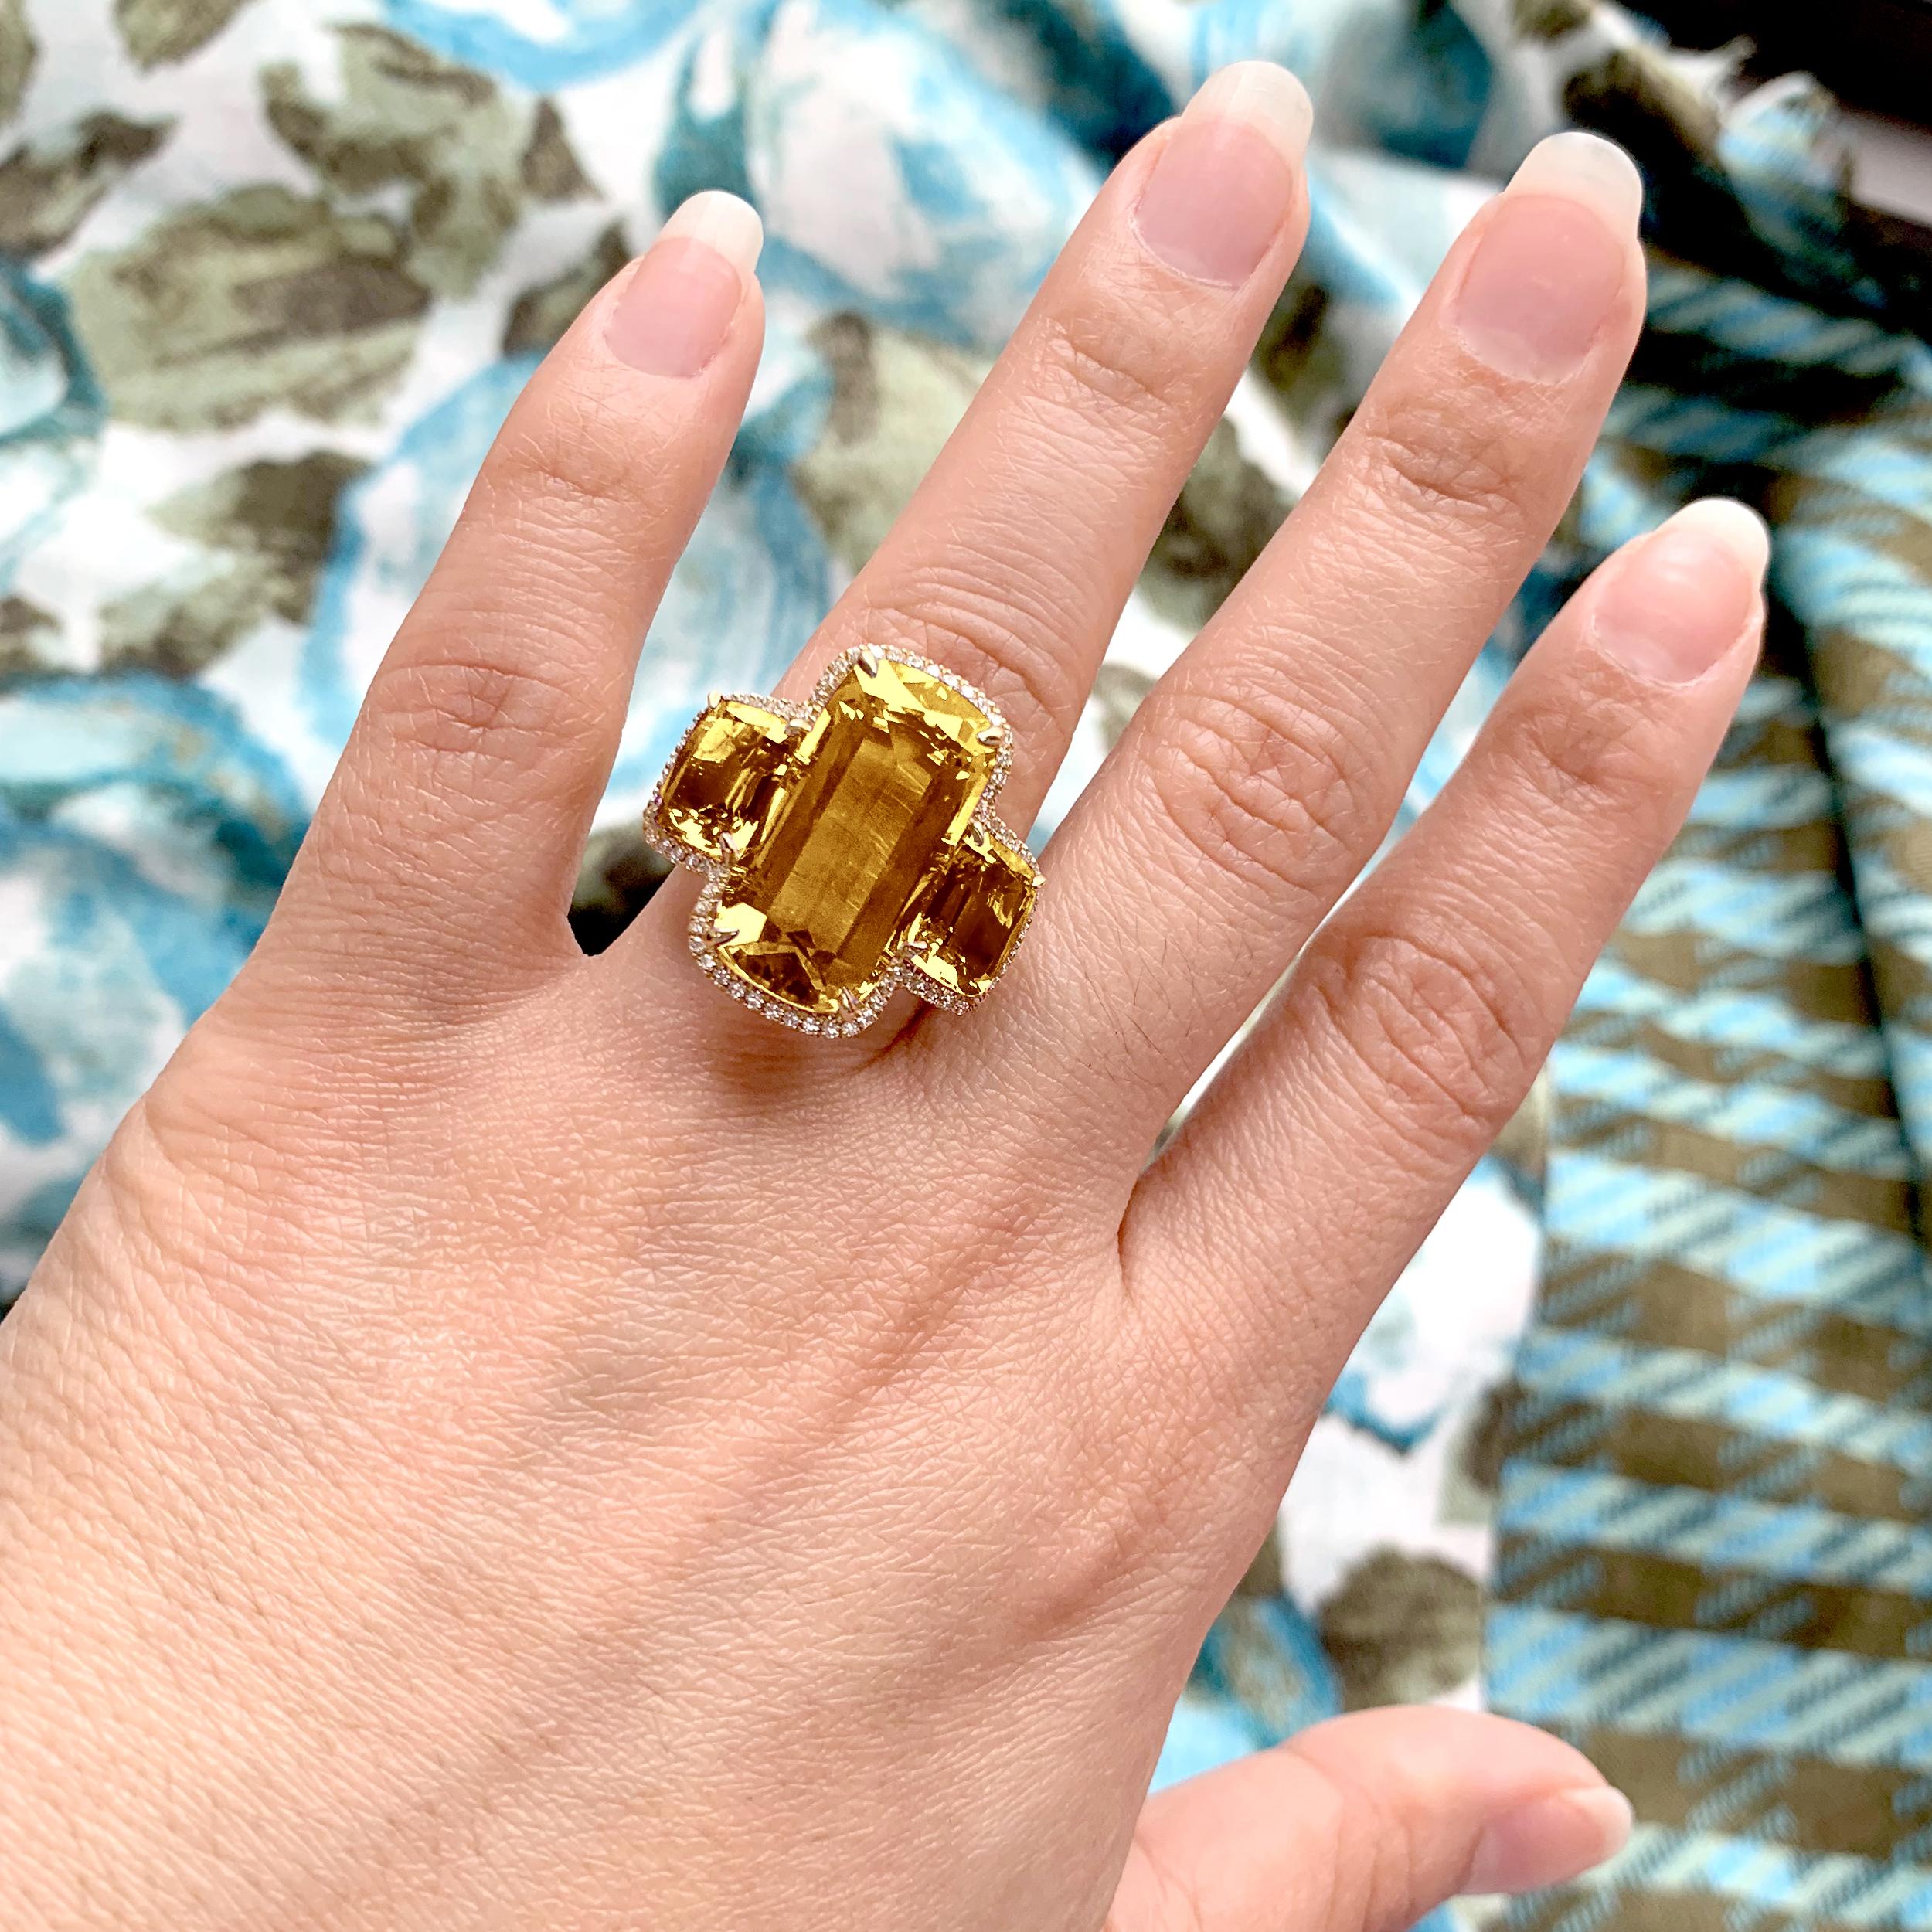 Citrine Cushion Ring in 18K Yellow Gold with Diamonds, from 'Gossip' Collection. Please allow 2-4 weeks for this item to be delivered.

Stone Size: 21 x 10.5 mm &  9 x 7 mm 

Diamonds: G-H / VS, Approx Wt: 0.33 Cts